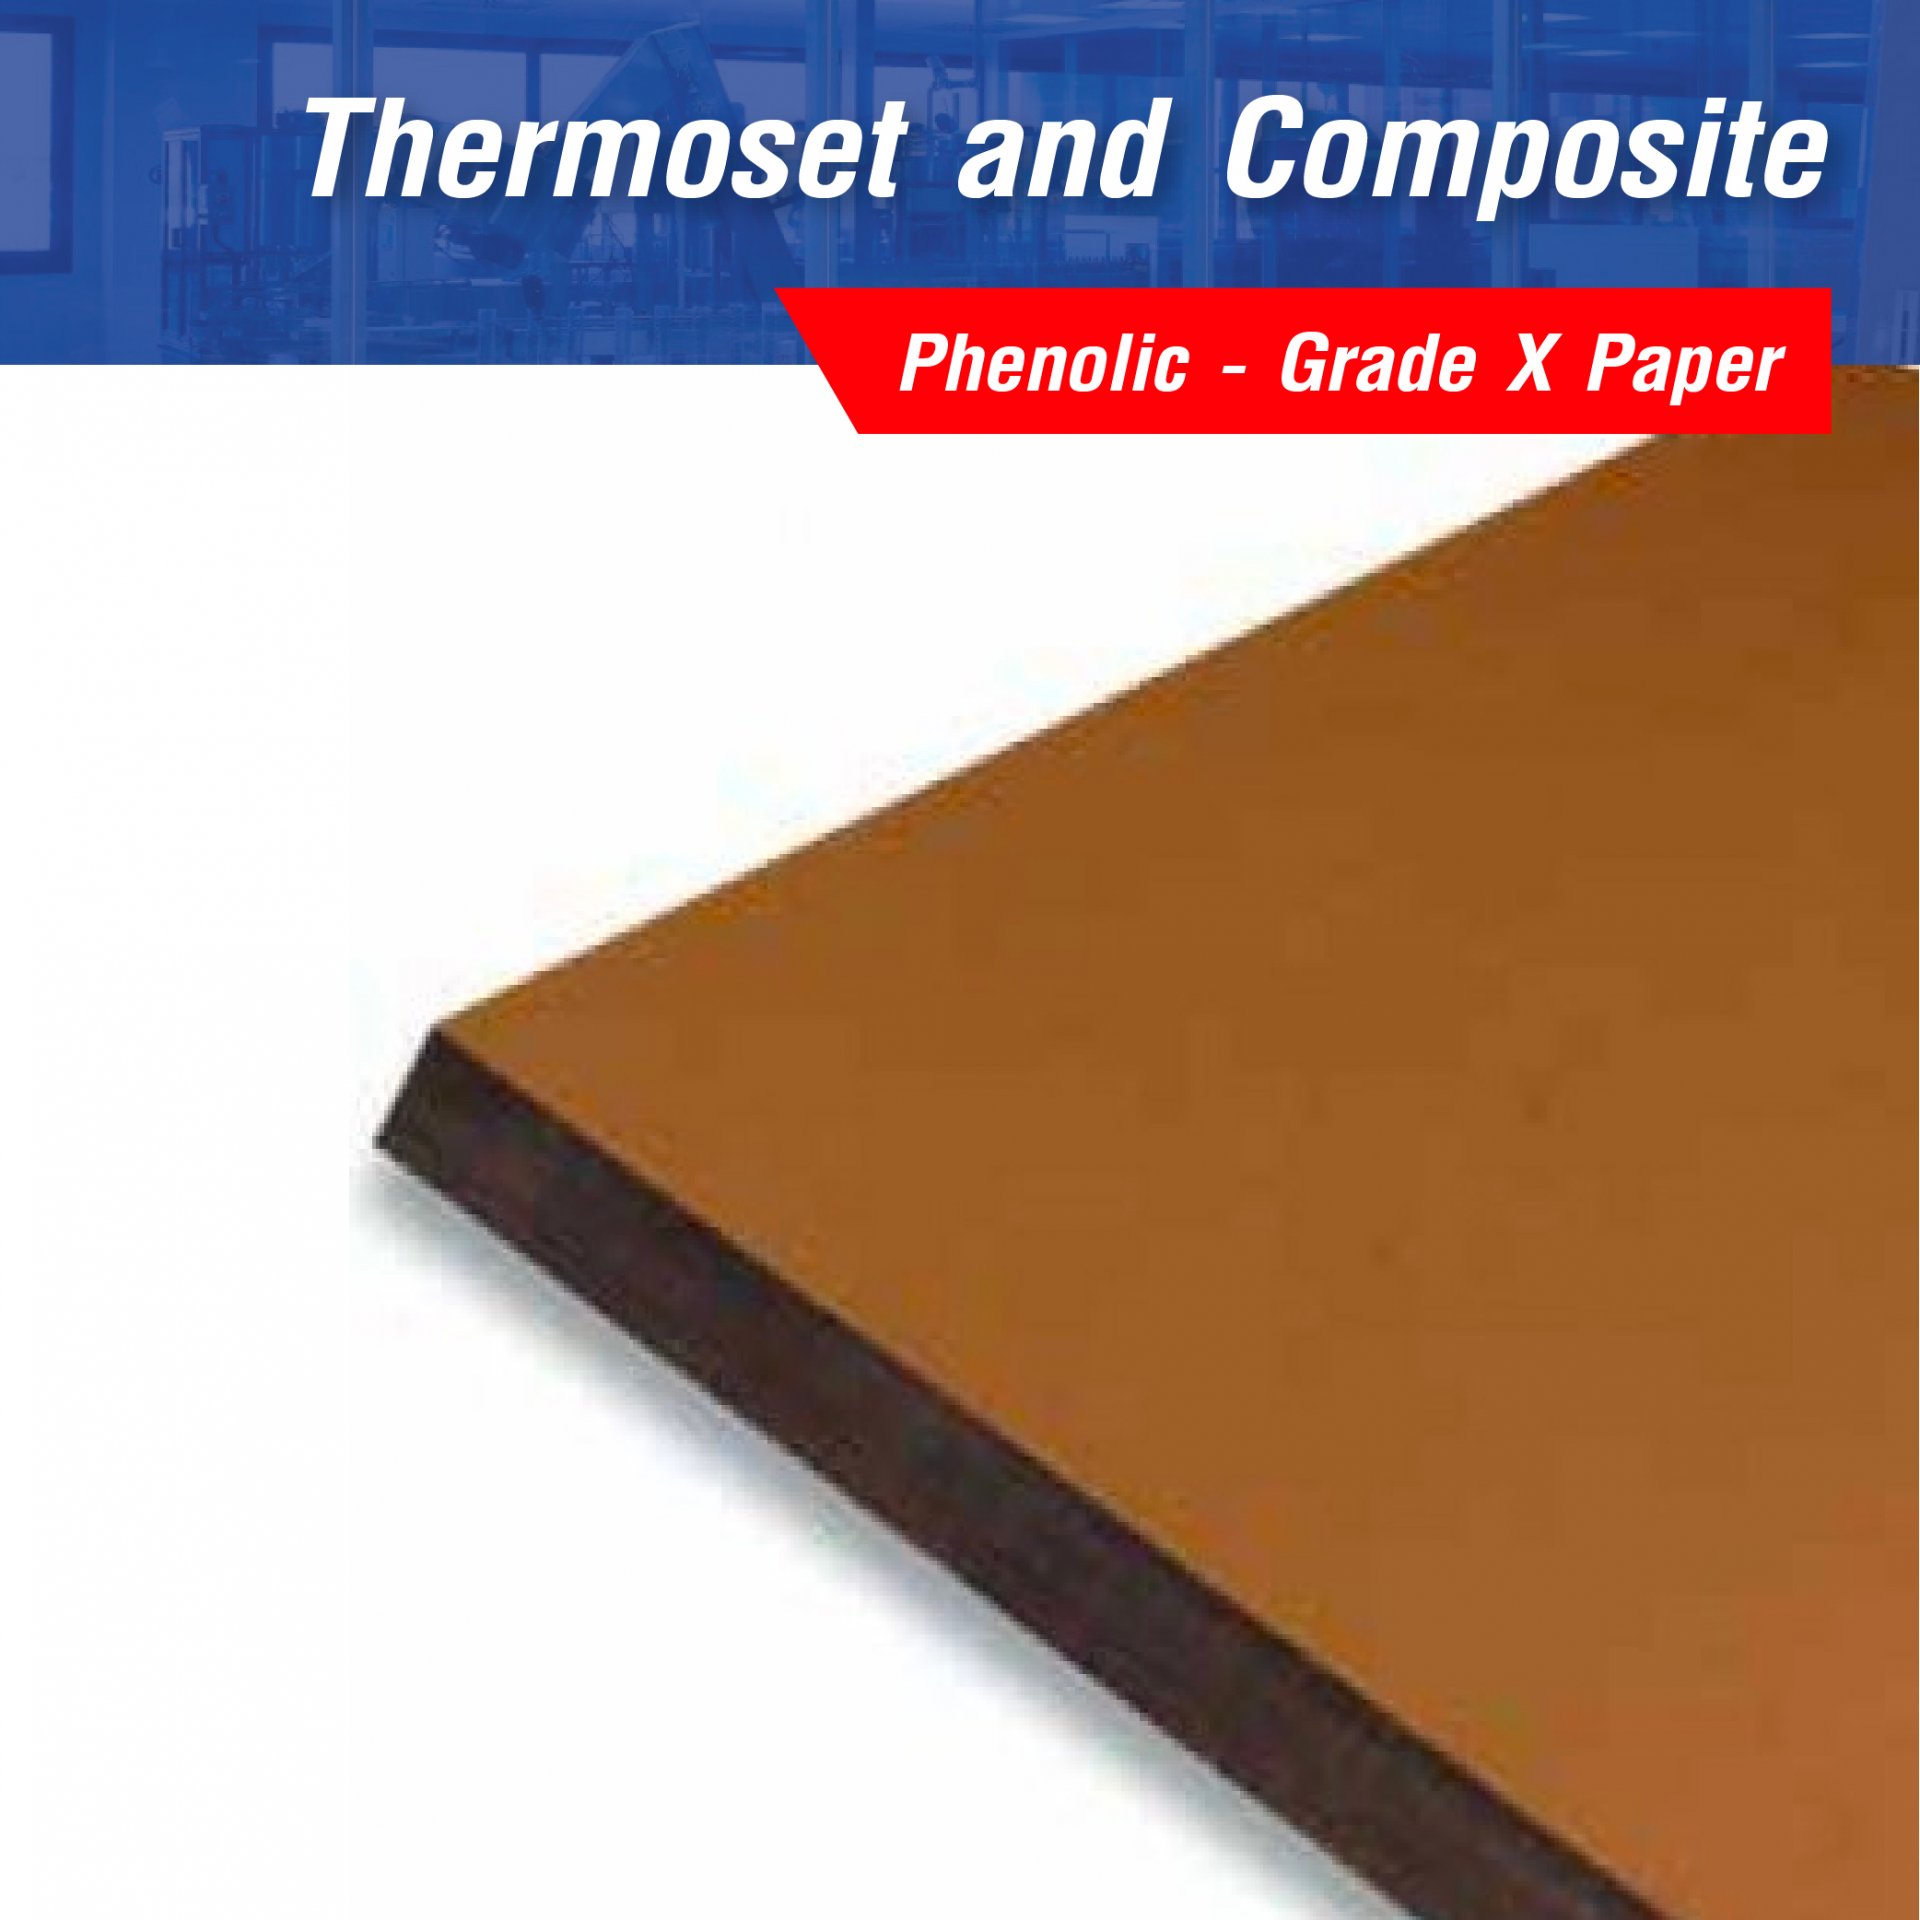 Thermoset and Composite